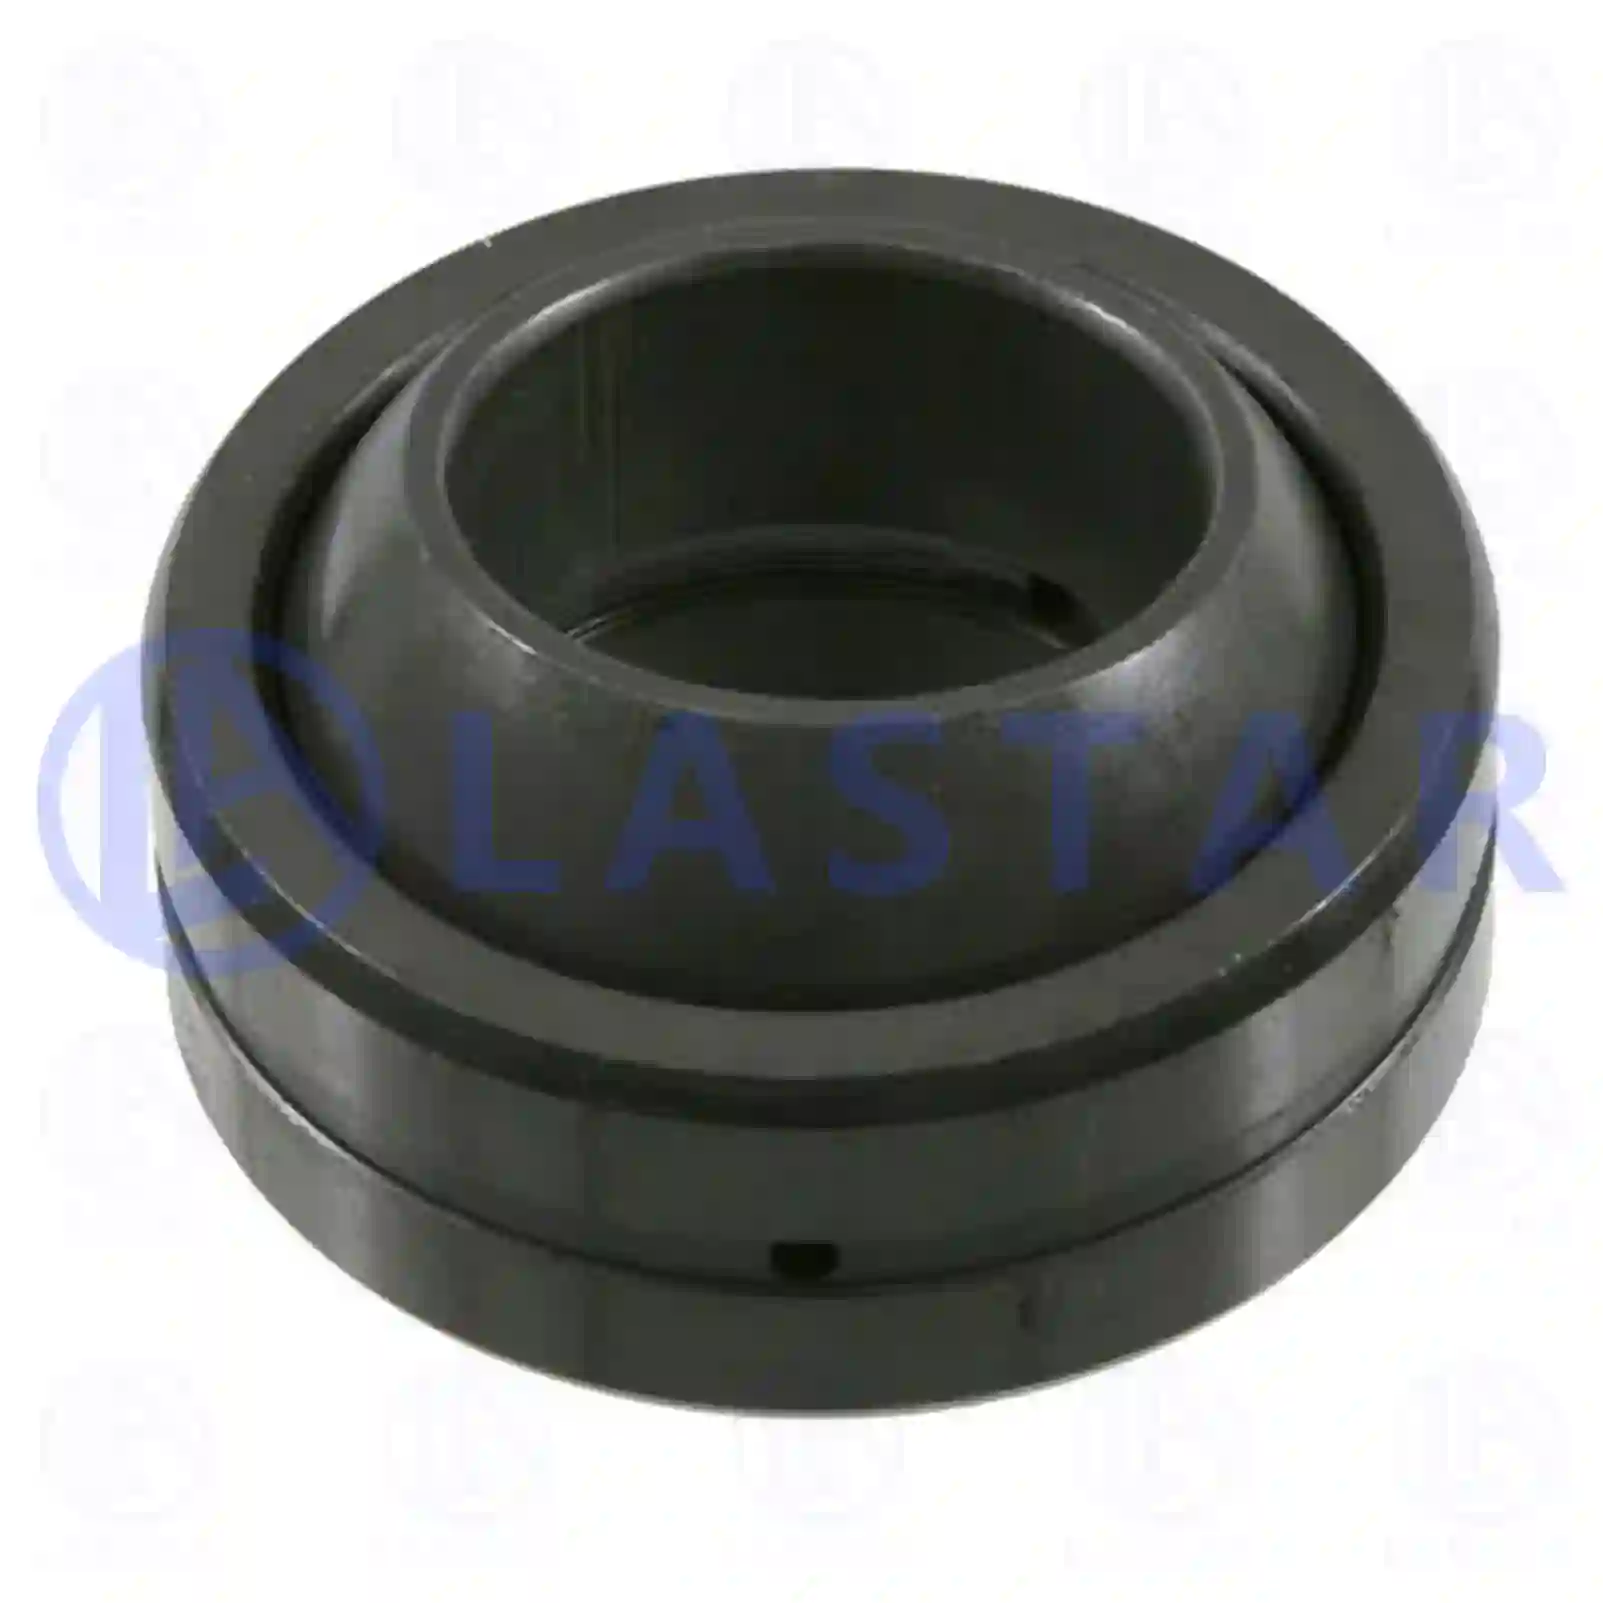 Joint bearing, 77727700, 0009816131, 0009817431, ZG41261-0008 ||  77727700 Lastar Spare Part | Truck Spare Parts, Auotomotive Spare Parts Joint bearing, 77727700, 0009816131, 0009817431, ZG41261-0008 ||  77727700 Lastar Spare Part | Truck Spare Parts, Auotomotive Spare Parts